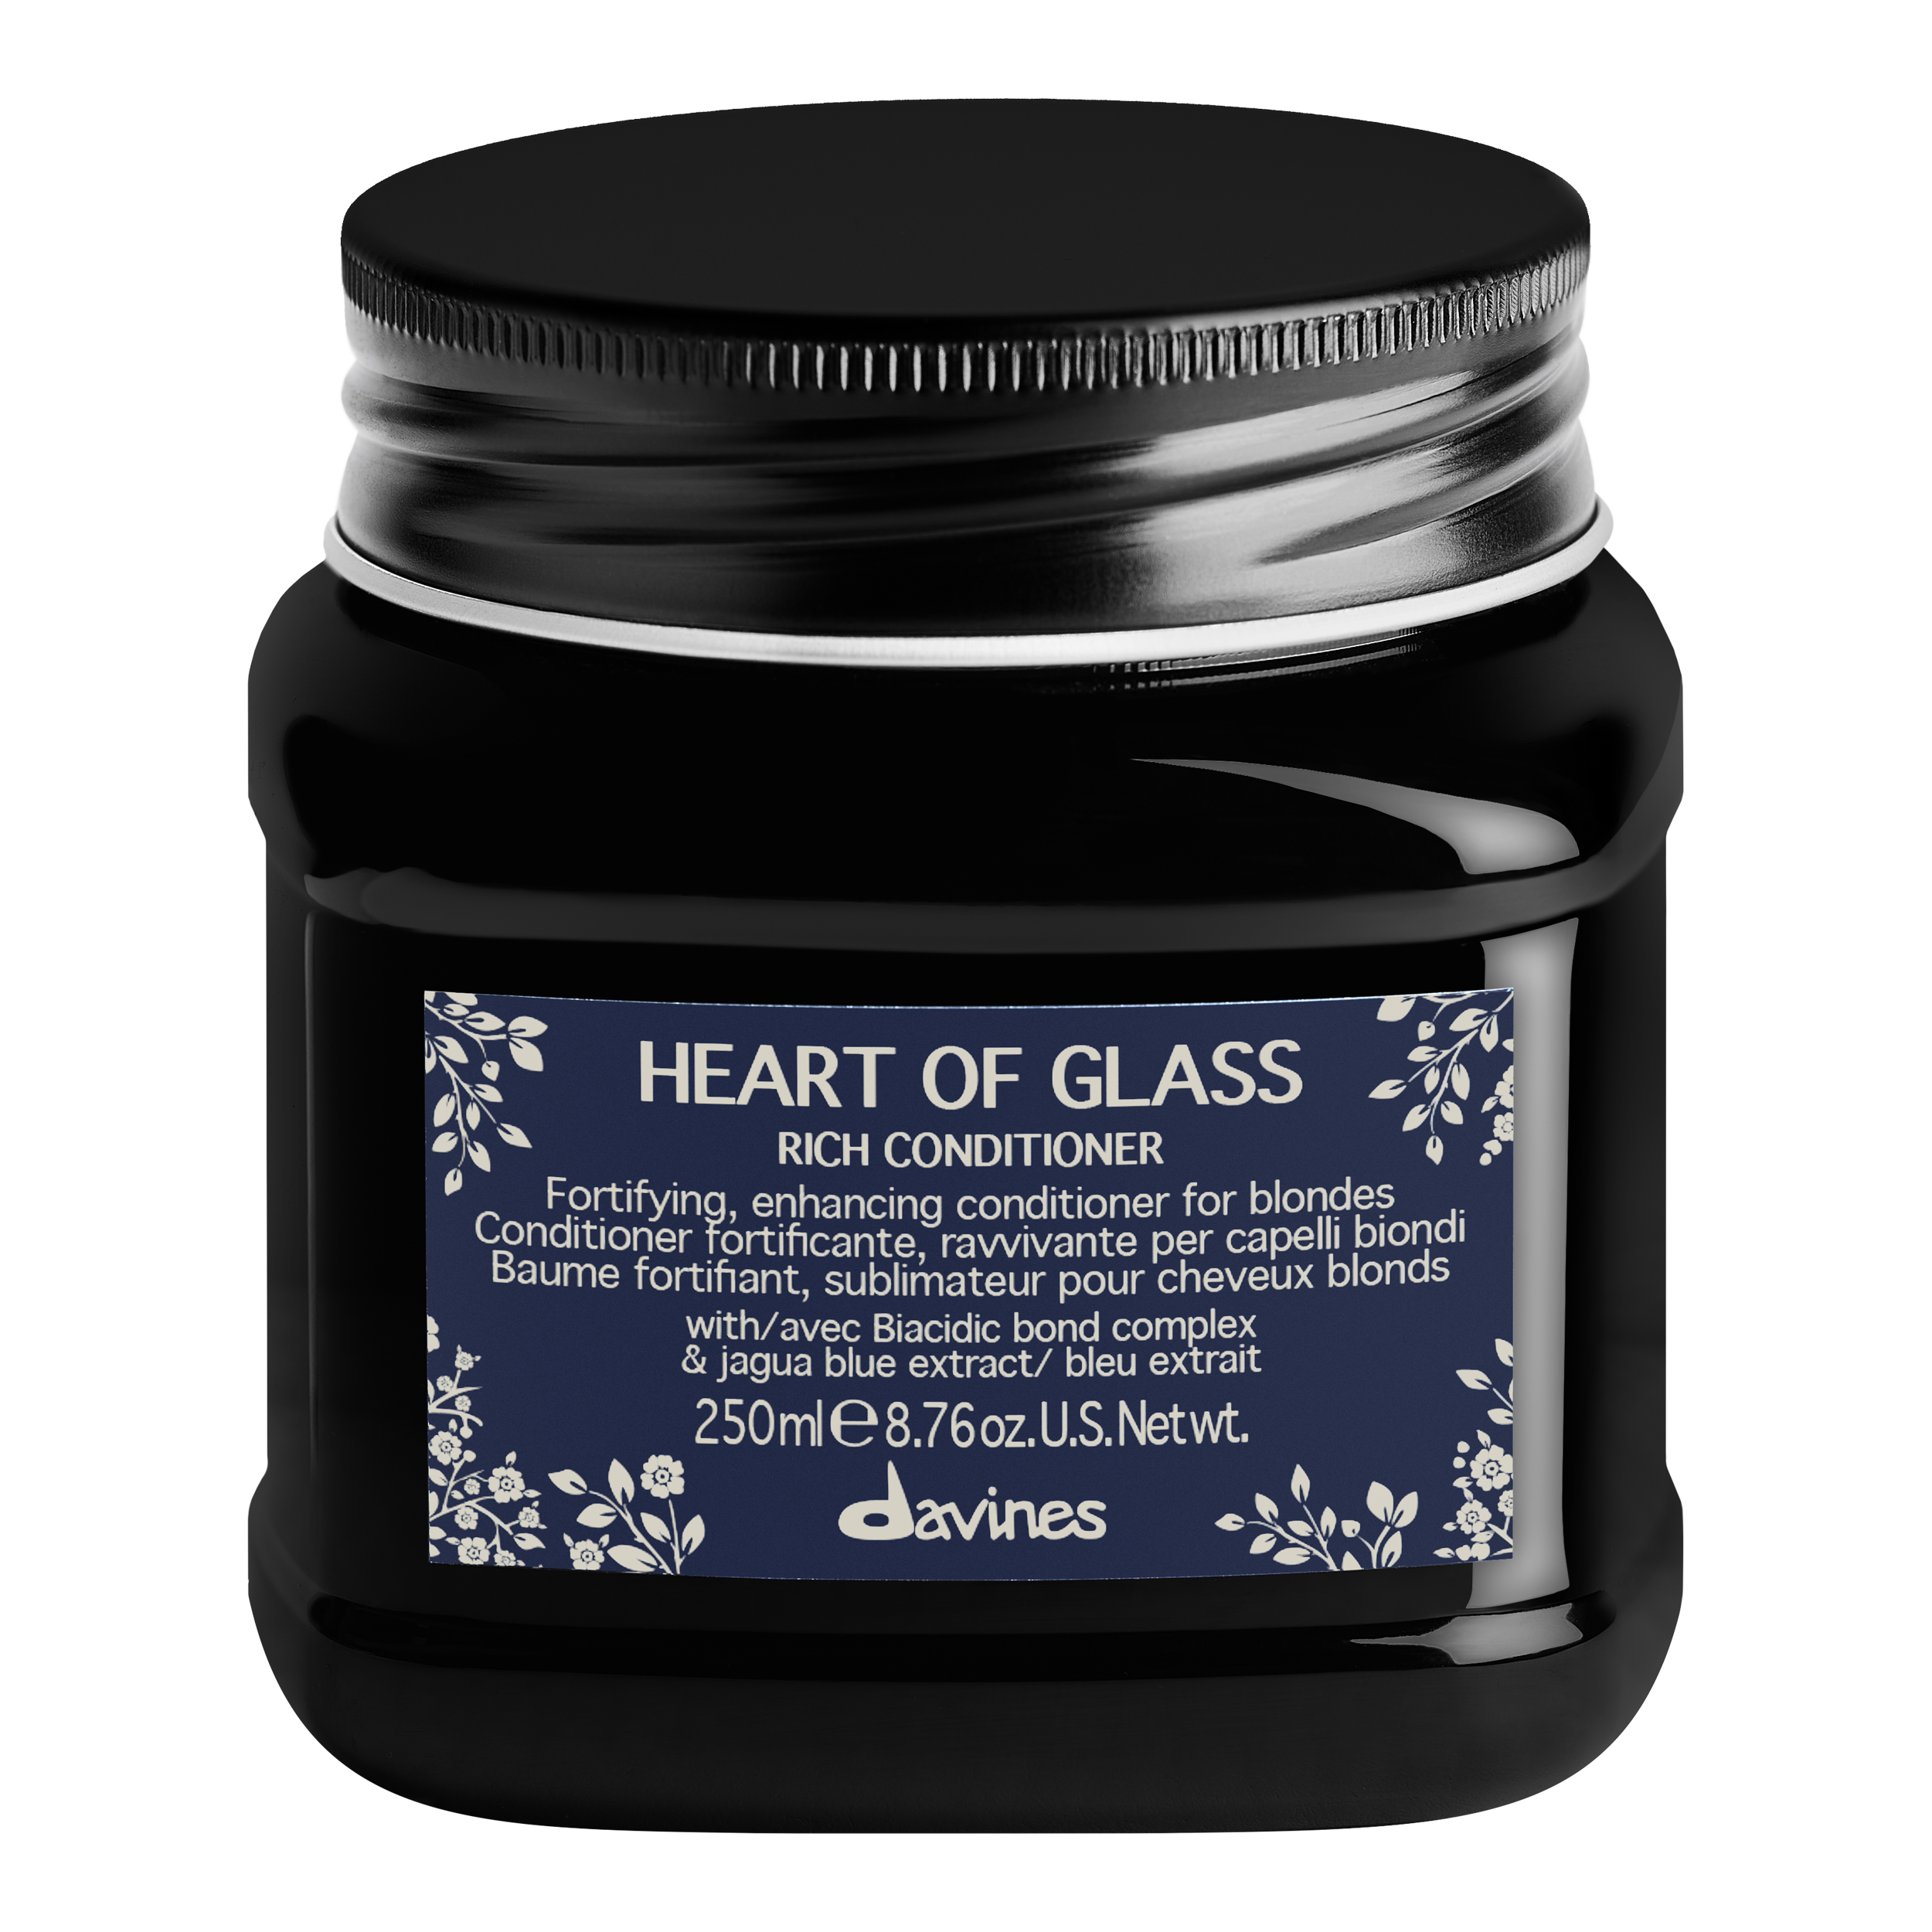 HEart of Glass - Rich Conditioner